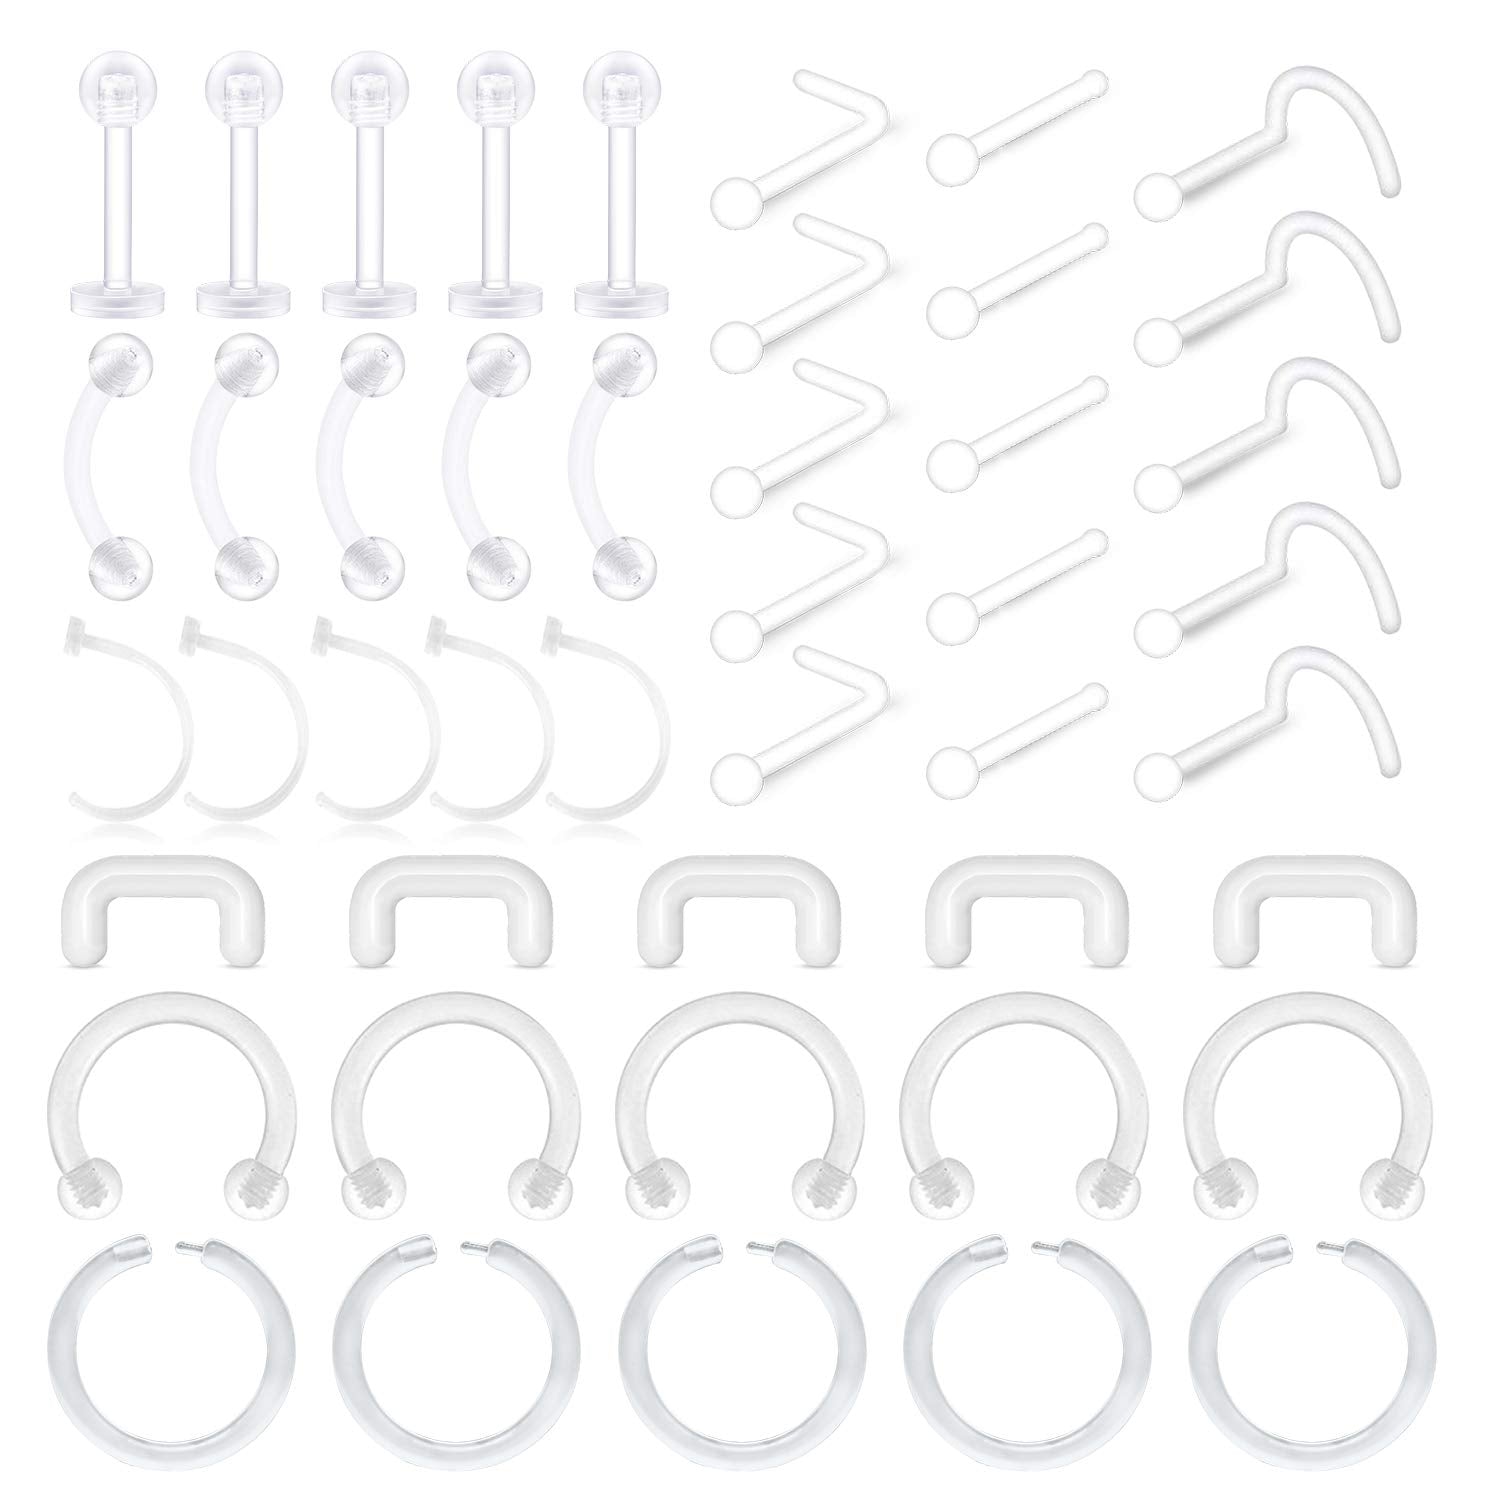 LAURITAMI 30-45pcs Clear Piercing Retainers Cartilage Lip Nose Helix Tragus Studs Rings Hoops Rings Bioflex Flexible Horseshoe Clicker Earrings Piercings Retainer 20G 16G